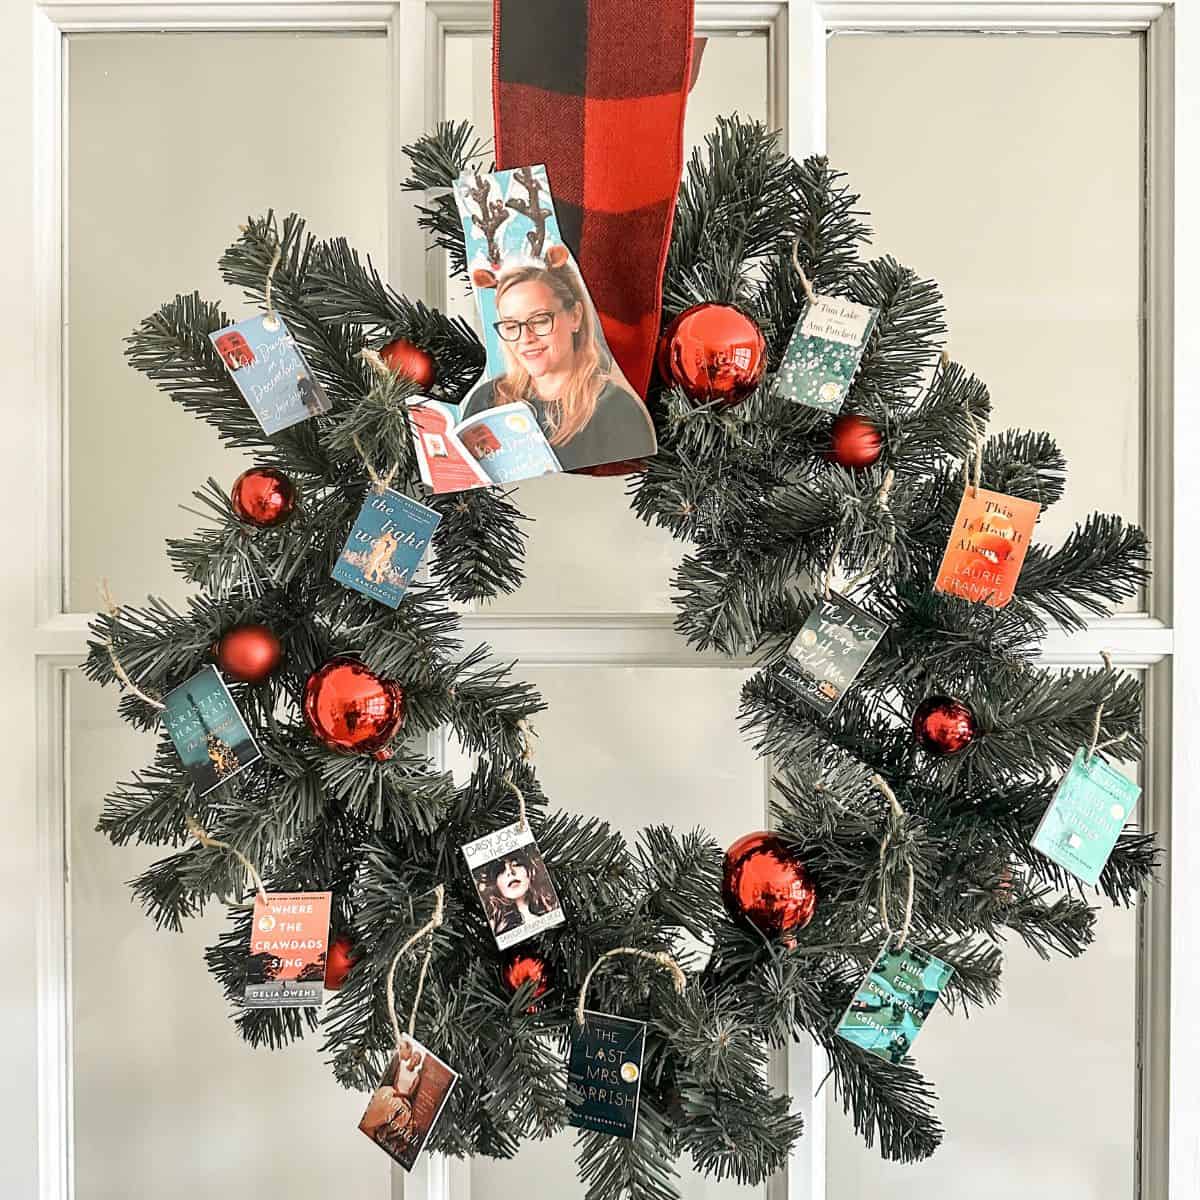 This “Wreath Witherspoon” Celebrates Reese’s Book Club